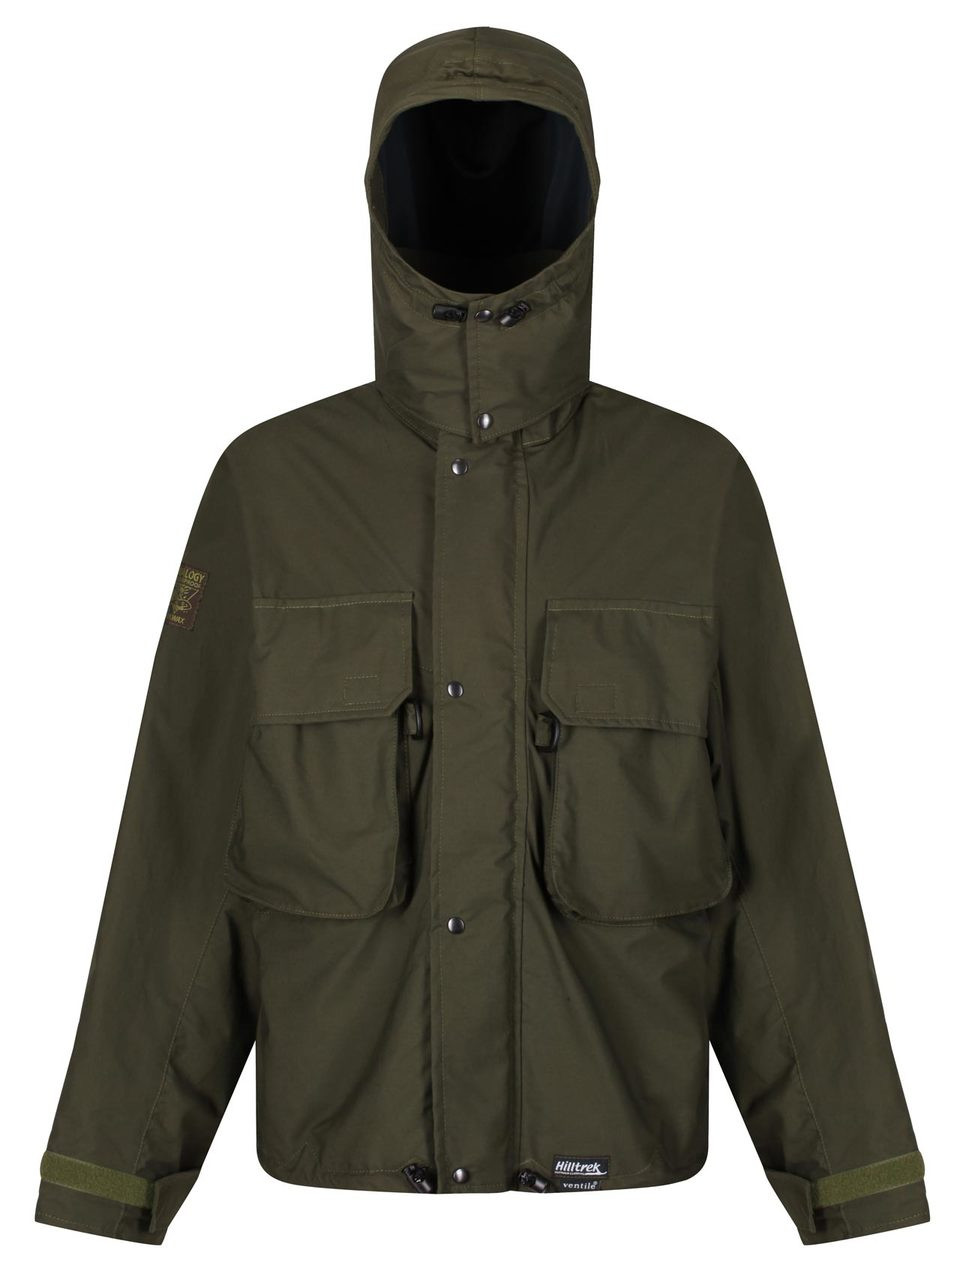 Dee Wading Jacket - fully waterproof and highly breathable